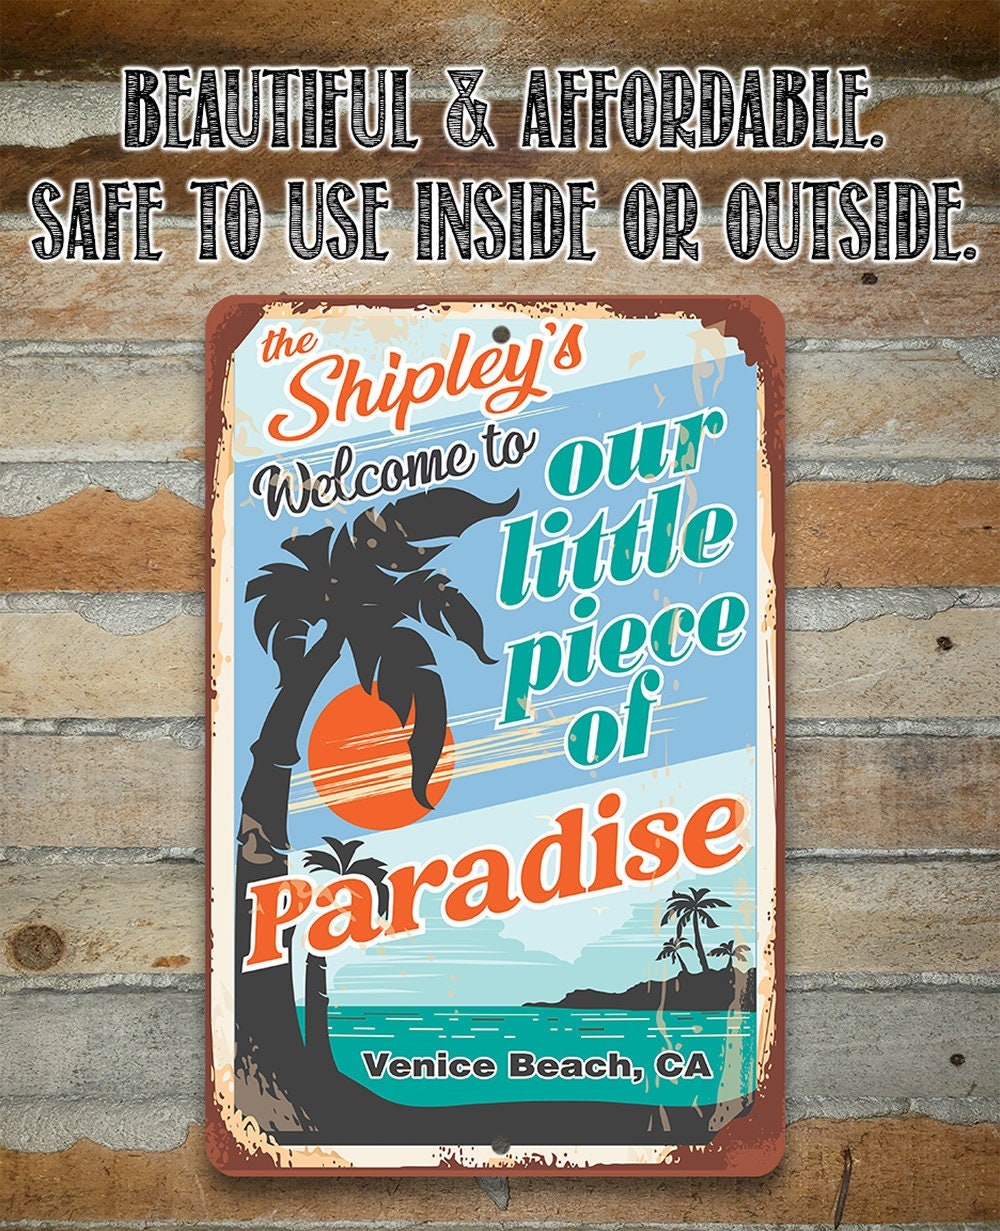 Welcome To Our Little Piece of Paradise - 8" x 12" or 12" x 18" Aluminum Tin Awesome Metal Poster Lone Star Art 